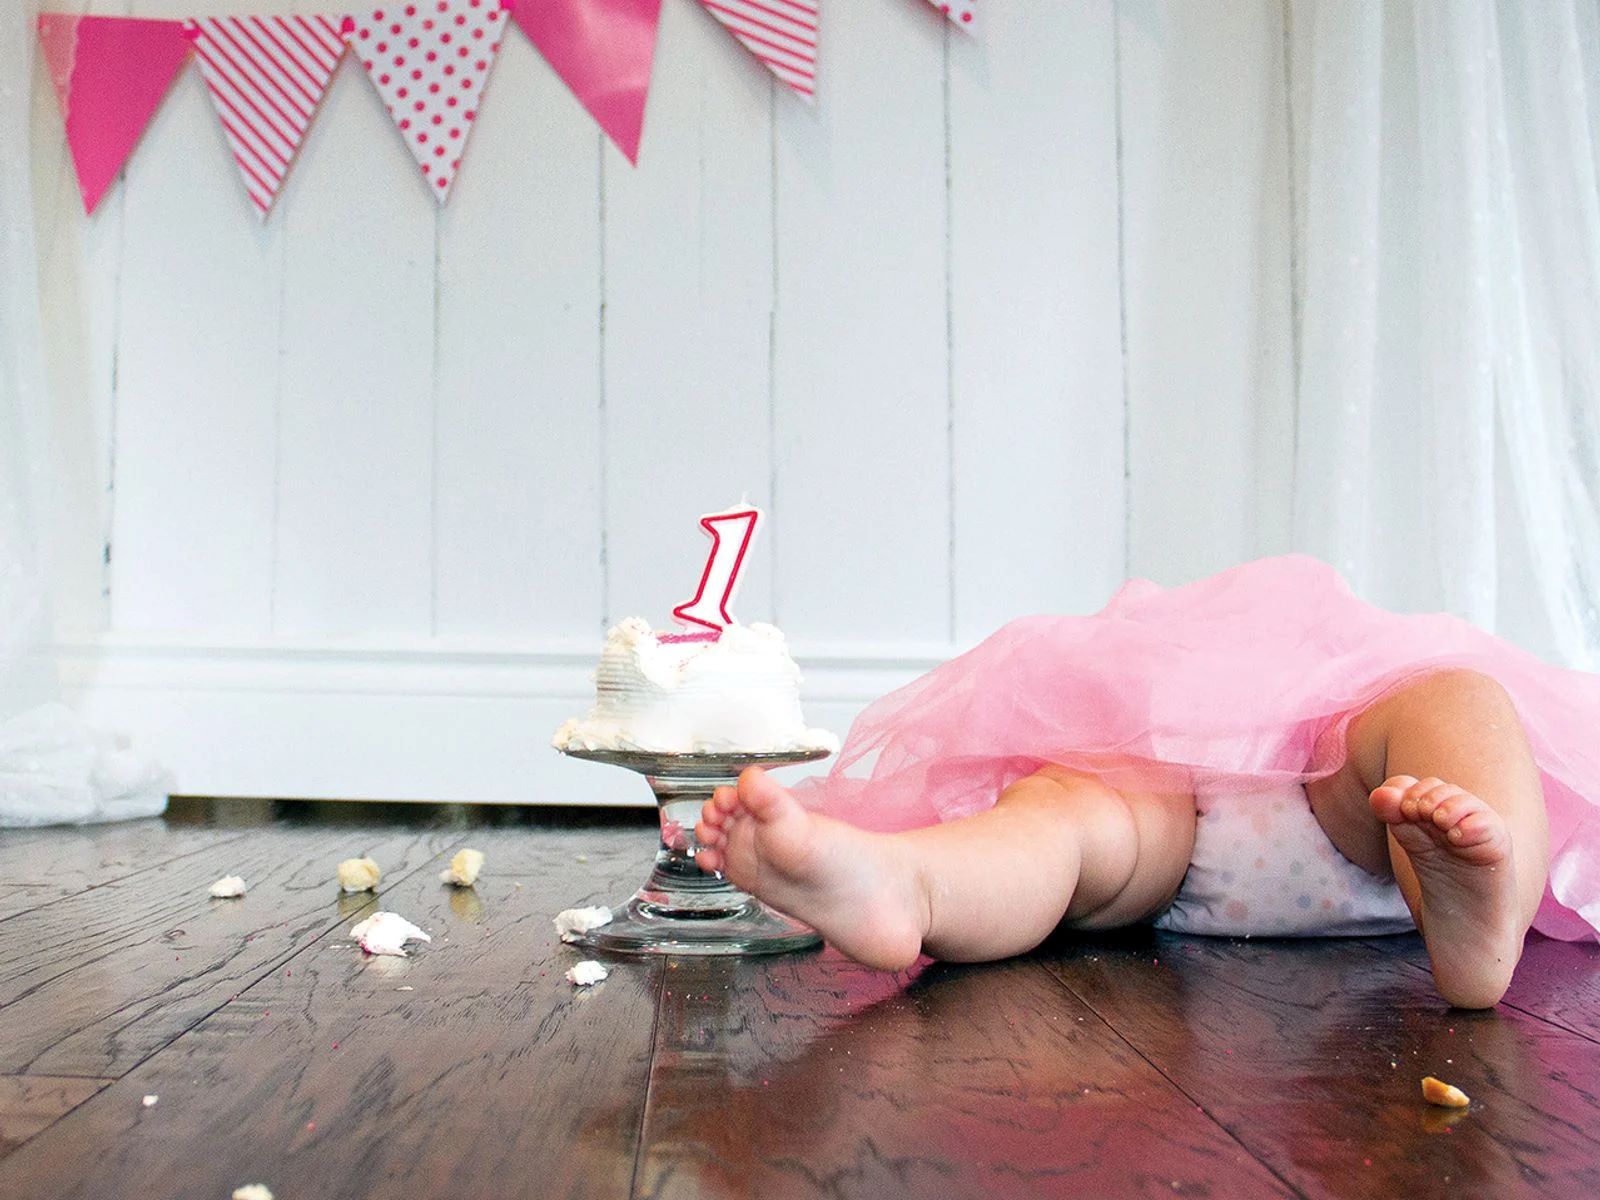 Adorable And Heartwarming Birthday Greeting For A One-Year-Old!